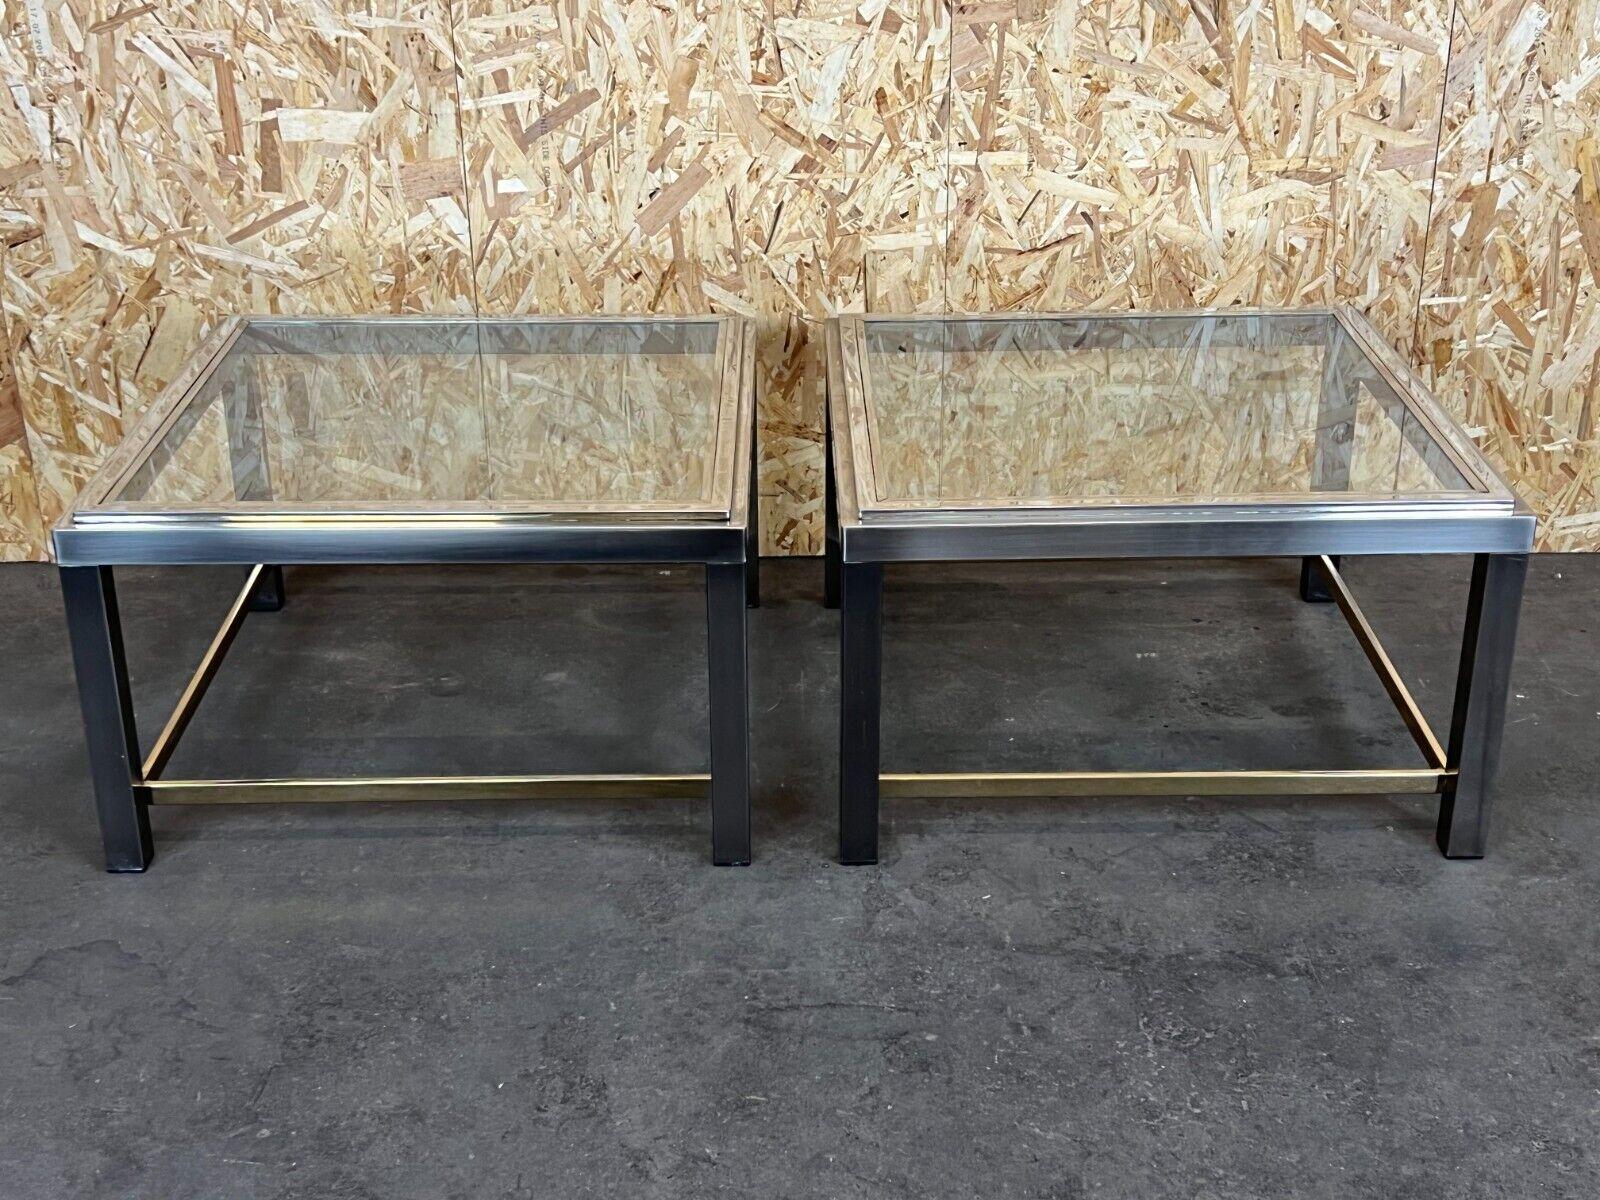 2x 60s 70s Jean Charles Coffee Table Chrome & Brass Side Table Space Age Design

Object: 2x coffee table

Manufacturer: Jean Charles

Condition: good - vintage

Age: around 1960-1970

Dimensions:

Width = 68cm
Depth = 68cm
Height = 41cm

Other